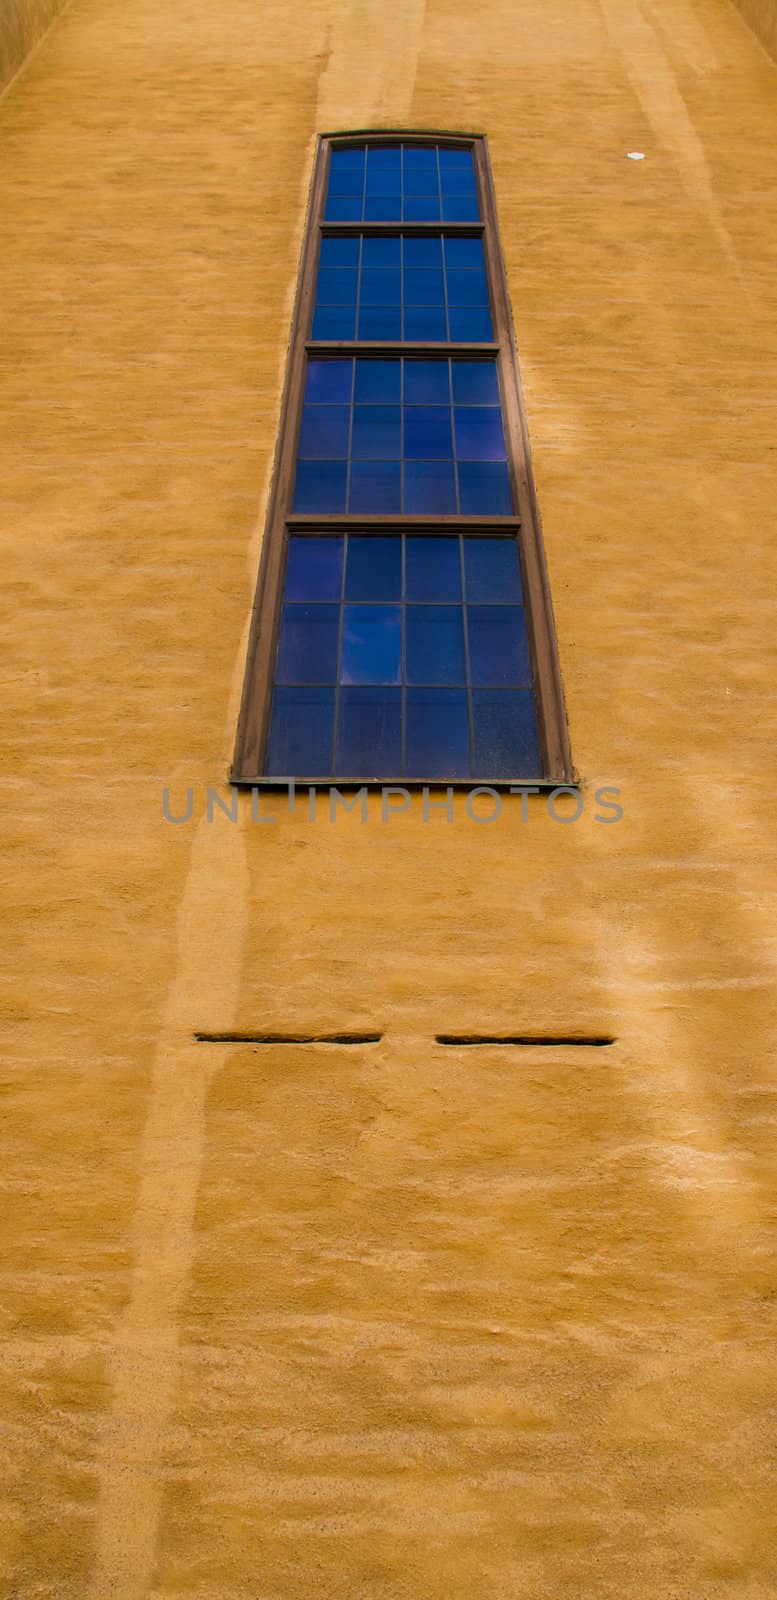 Row of windows on a brown wall